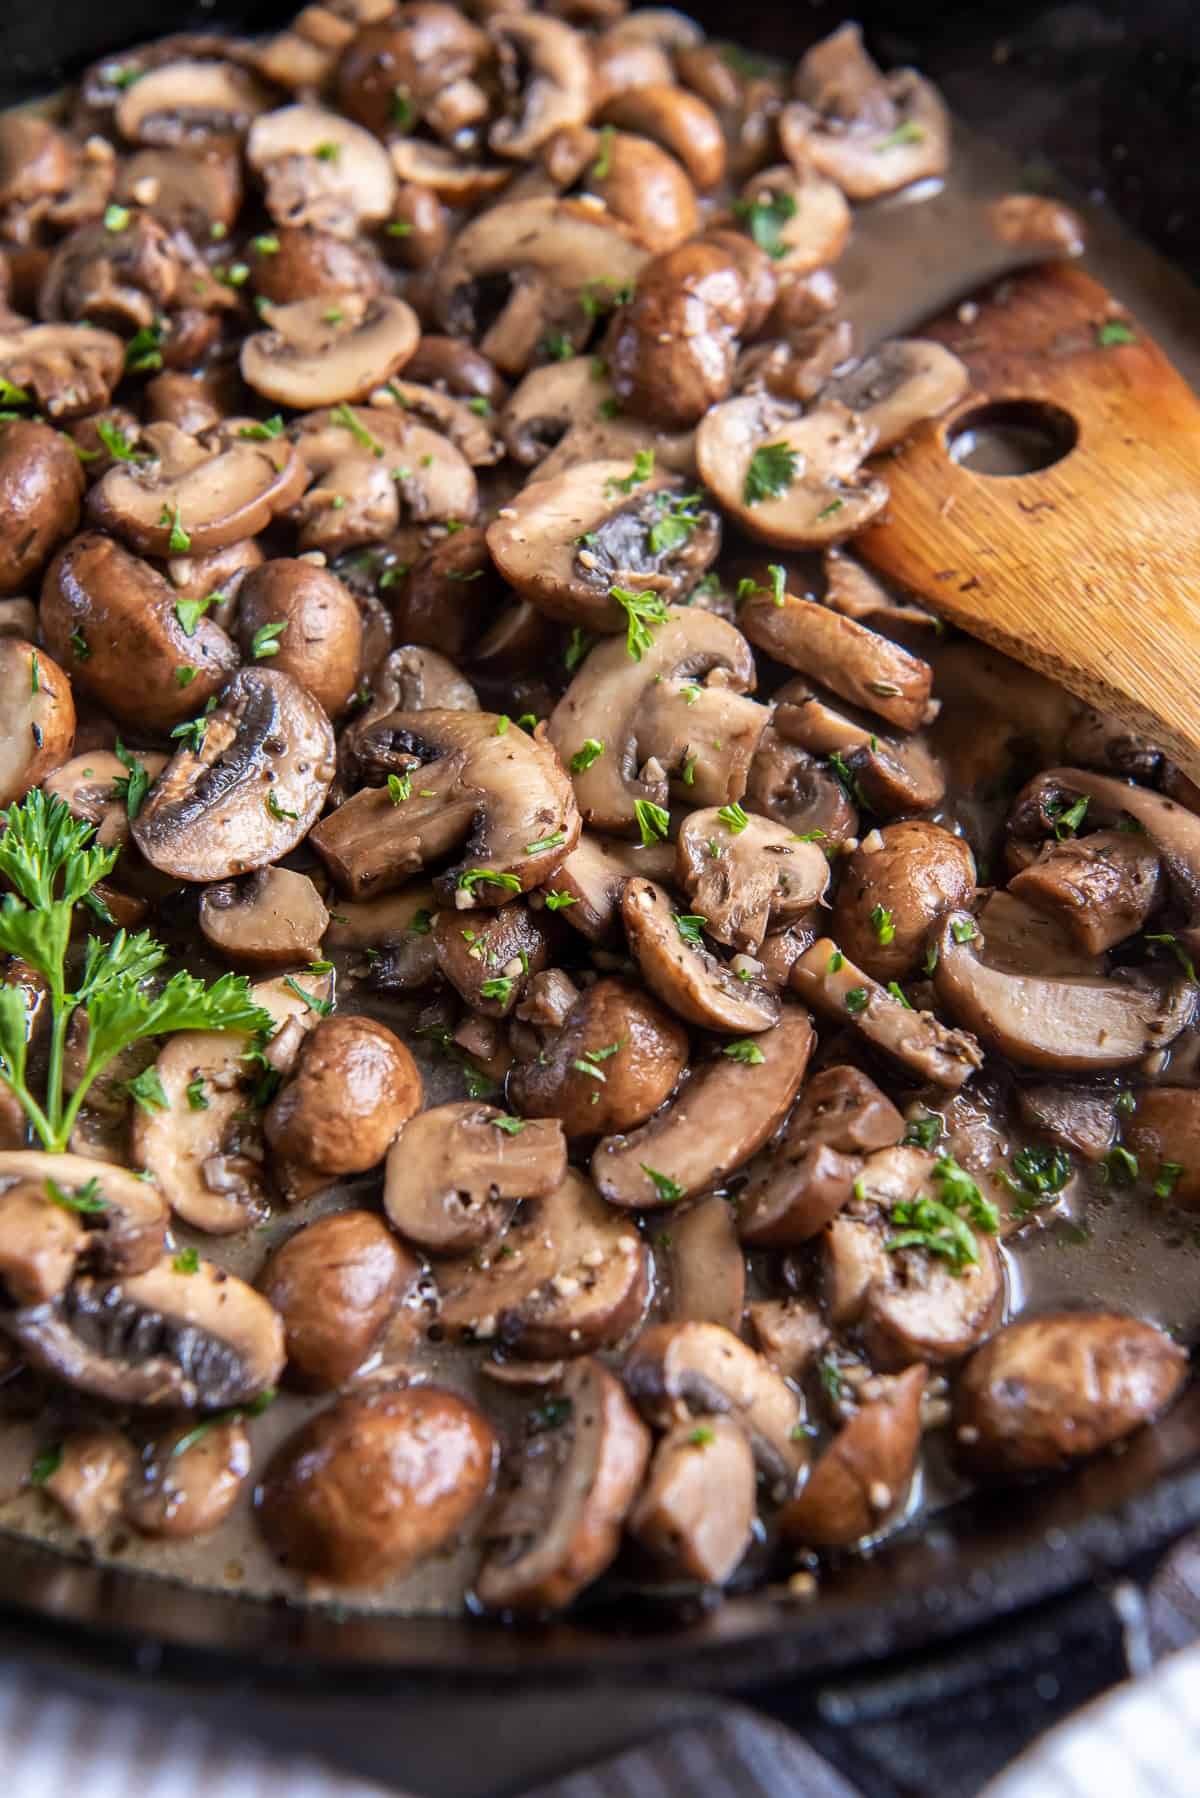 A closeup of sautéed mushrooms in a cast iron skillet with a wooden spoon.